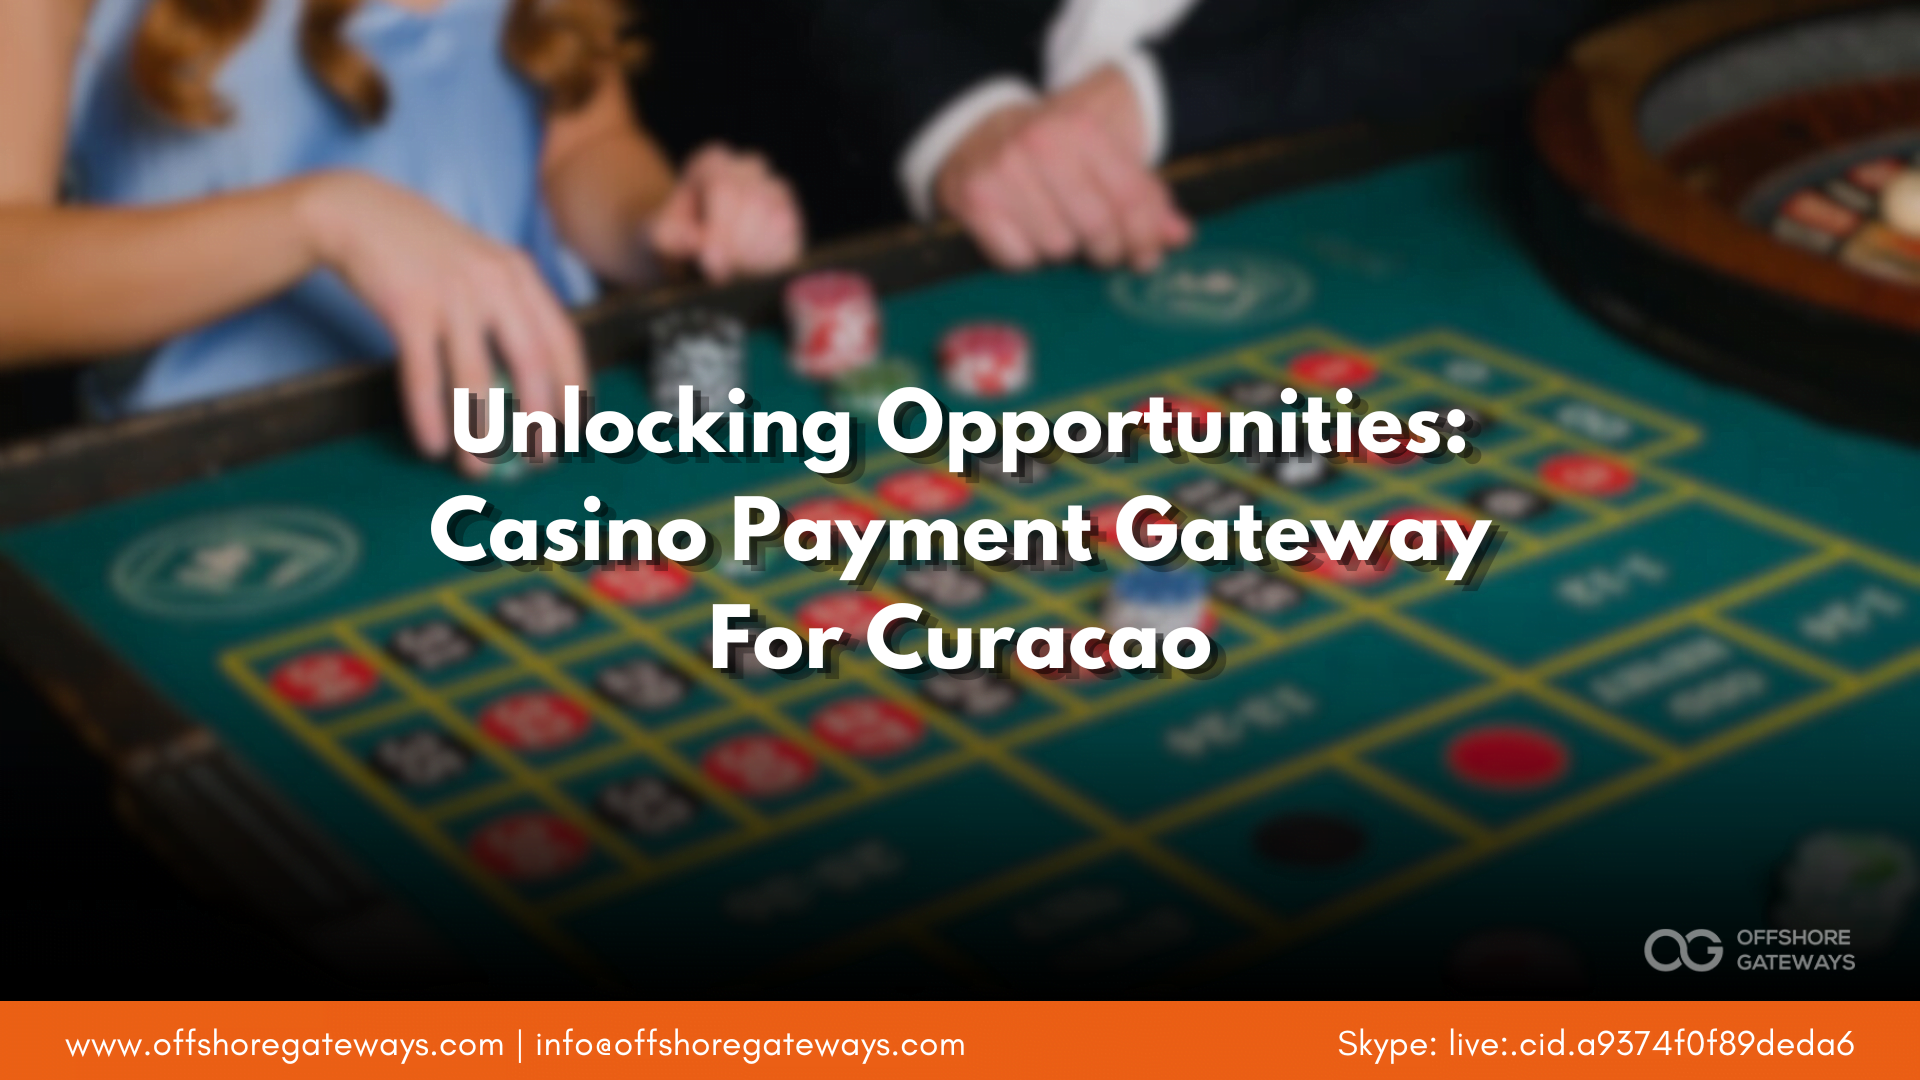 unlocking-opportunities-casino-payment-gateway-for-curacao-offshoregateways